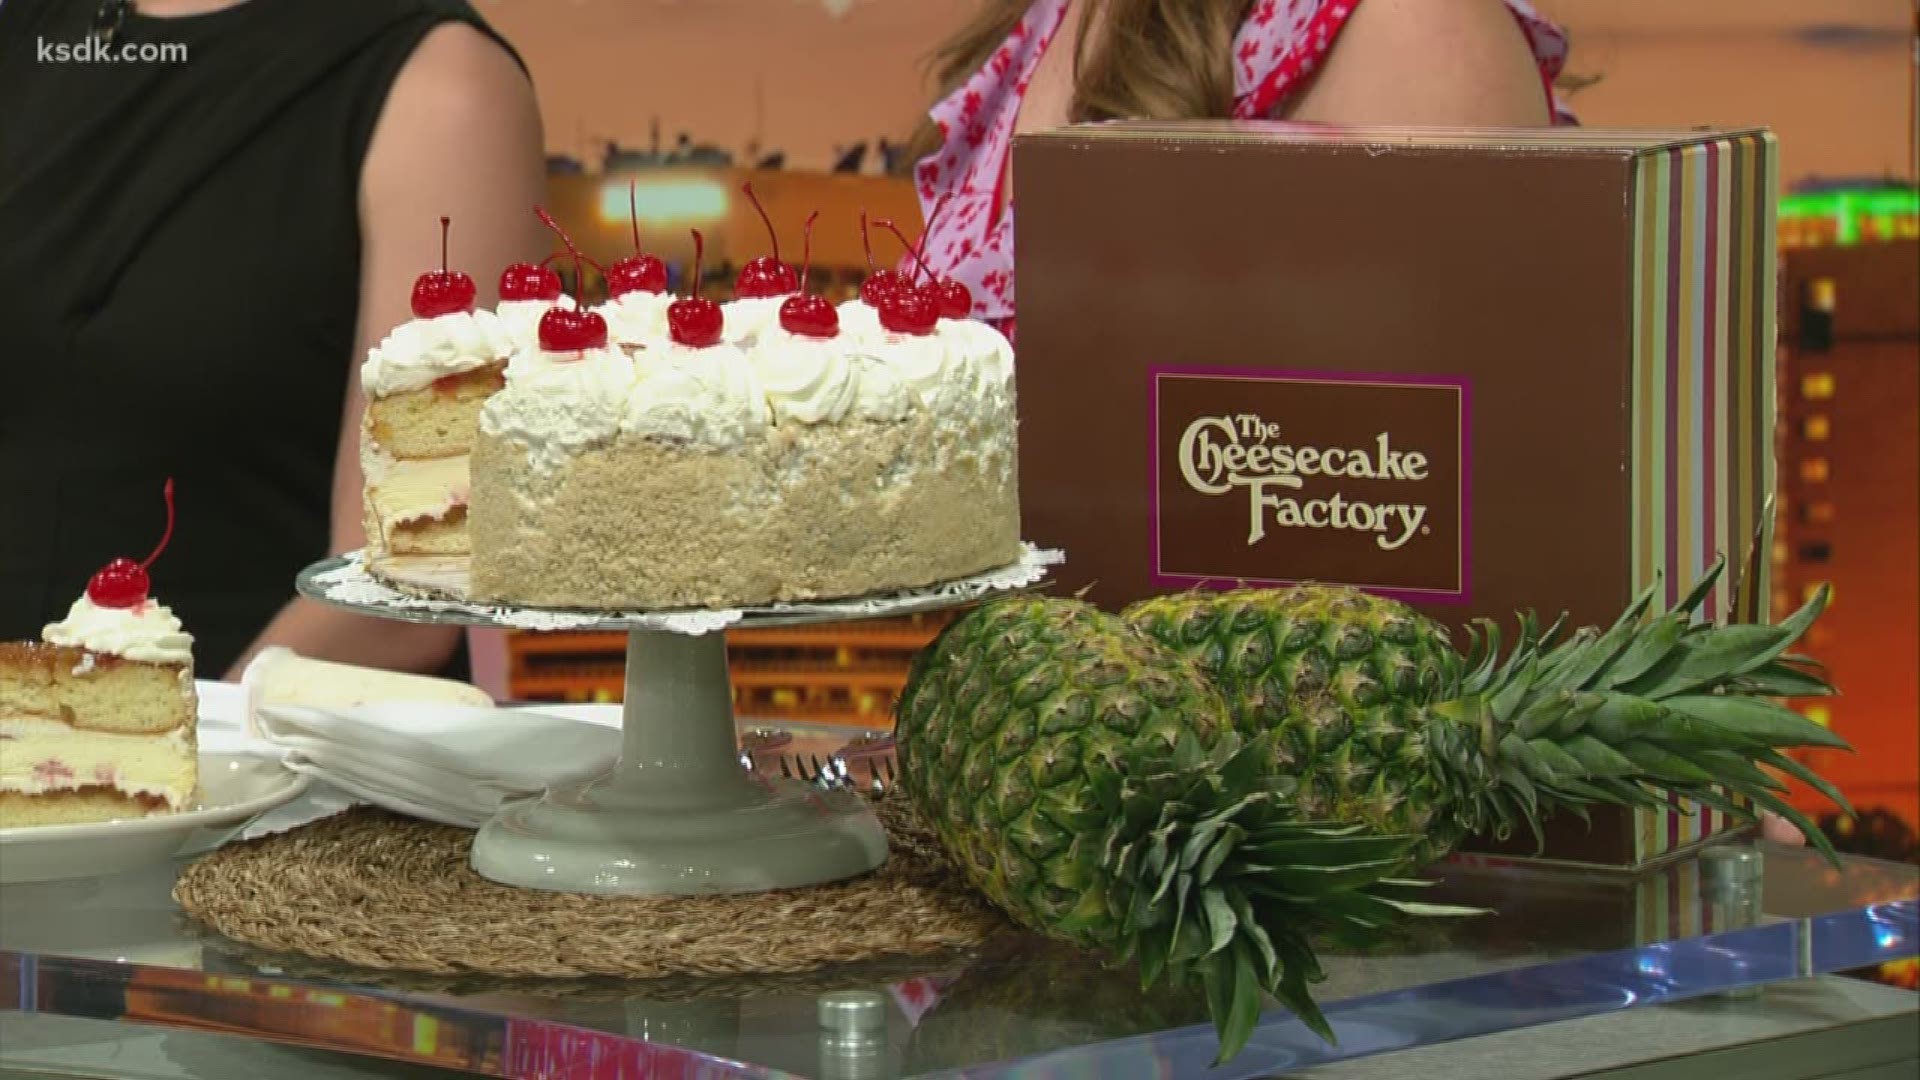 The Cheesecake Factory will celebrate National Cheesecake Day